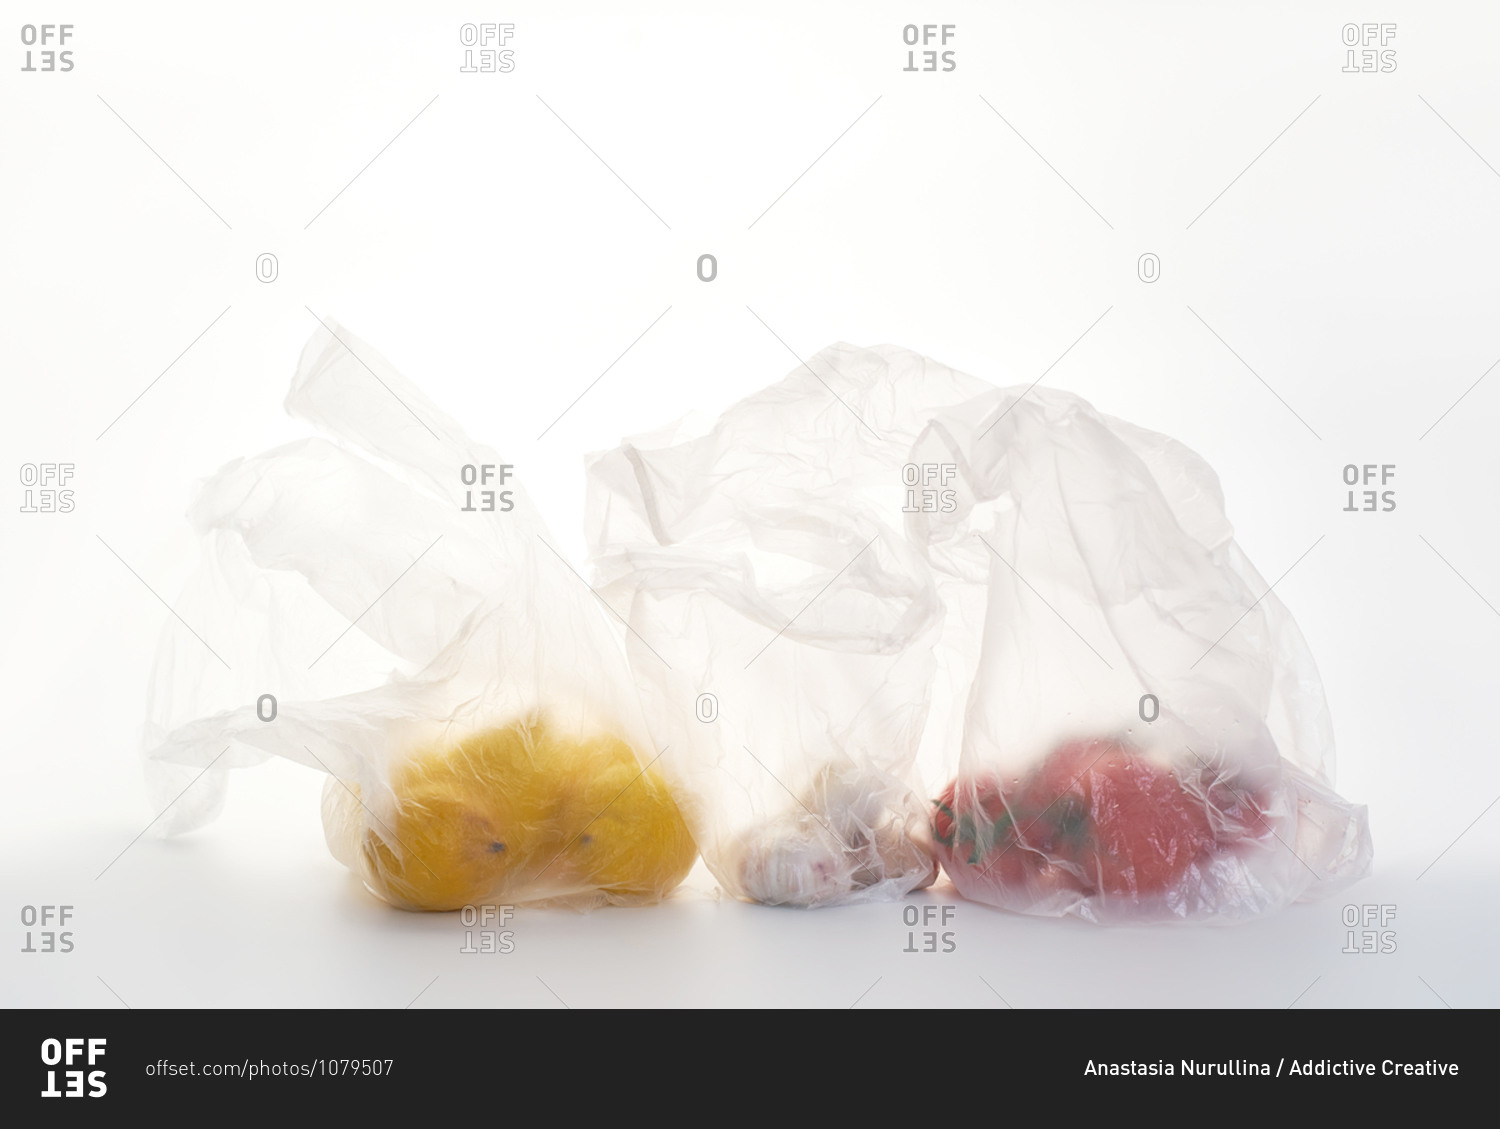 Still life with food in plastic bags backlit on white background